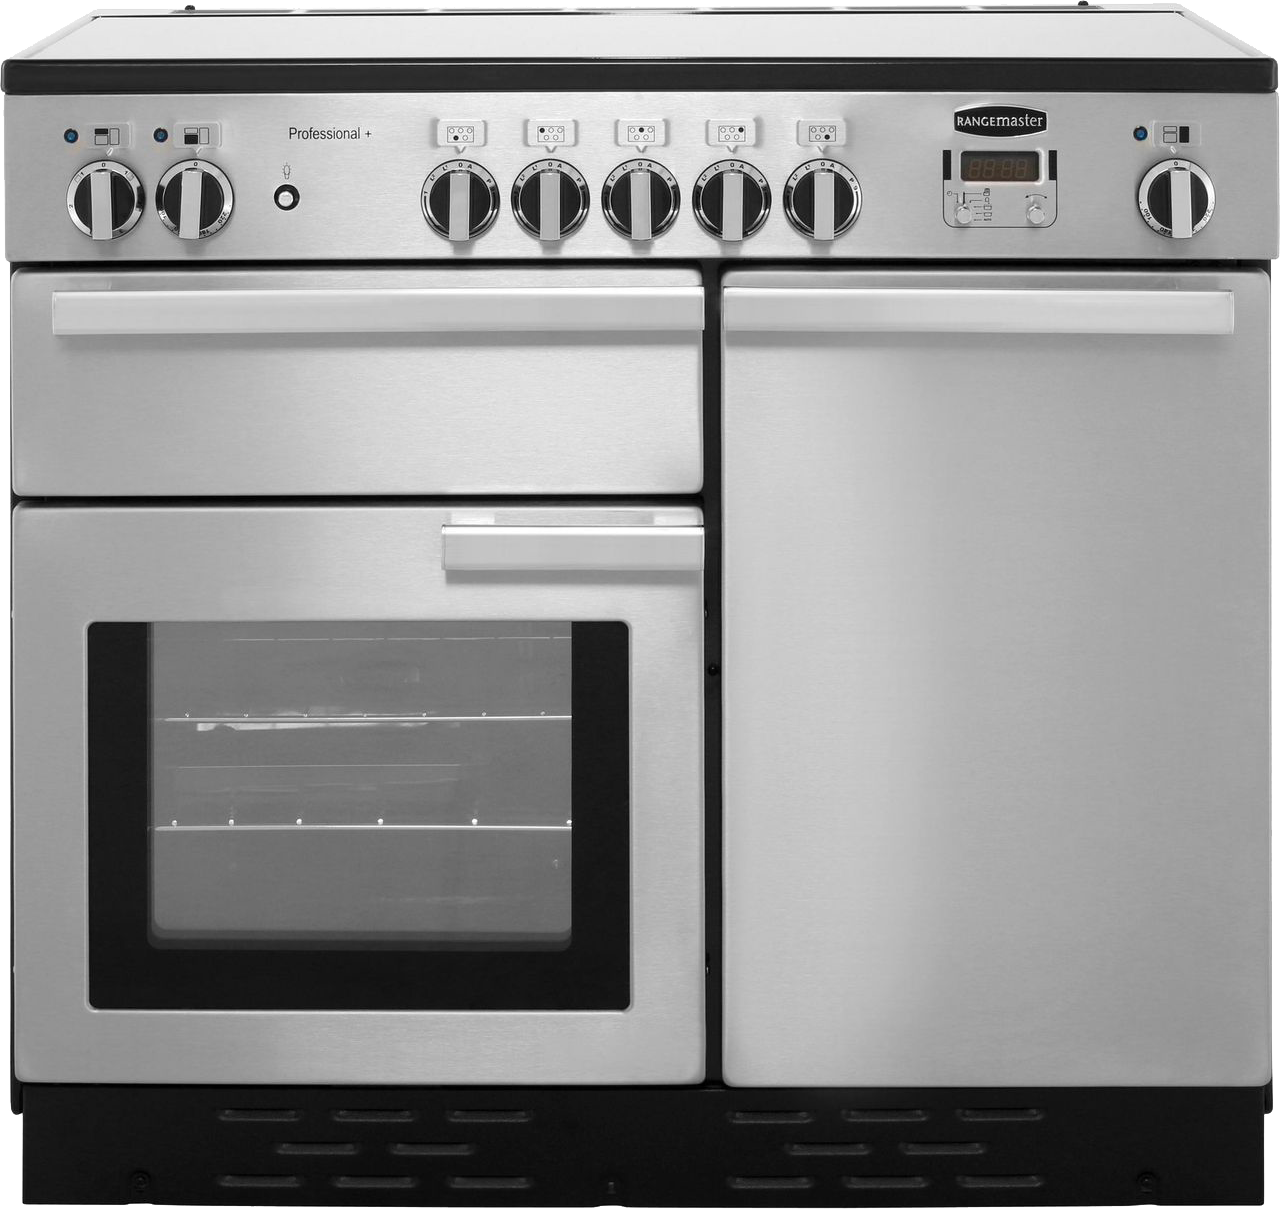 Rangemaster Professional Plus PROP100EISS/C 100cm Electric Range Cooker with Induction Hob - Stainless Steel - A/A Rated, Stainless Steel